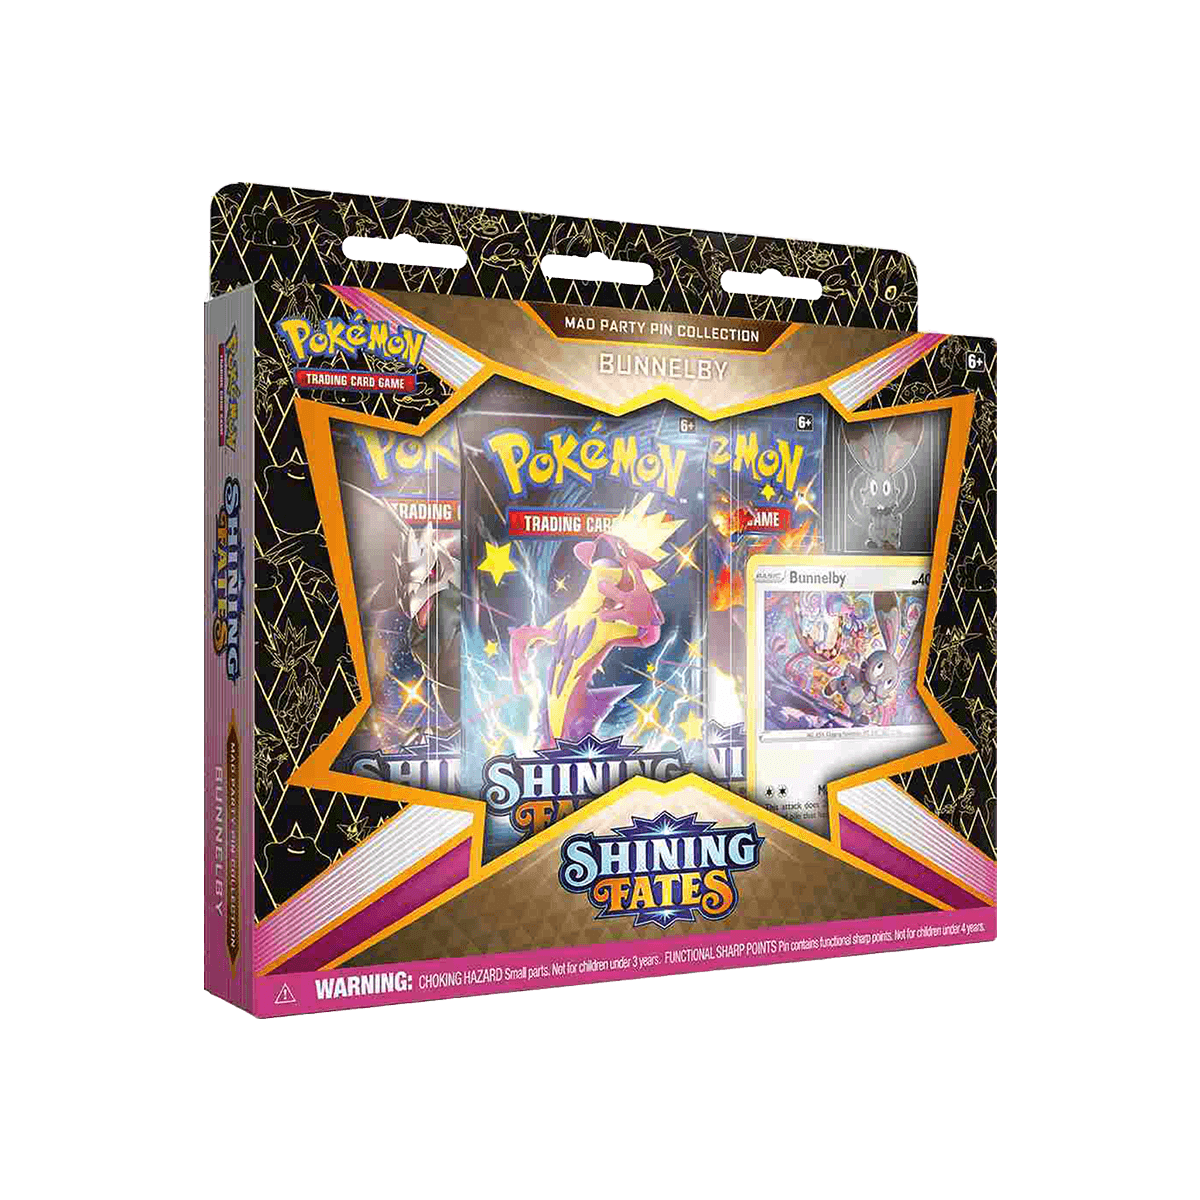 Pokémon TCG - Shining Fates Mad Party Pin Collection - Cardmaniac.ch